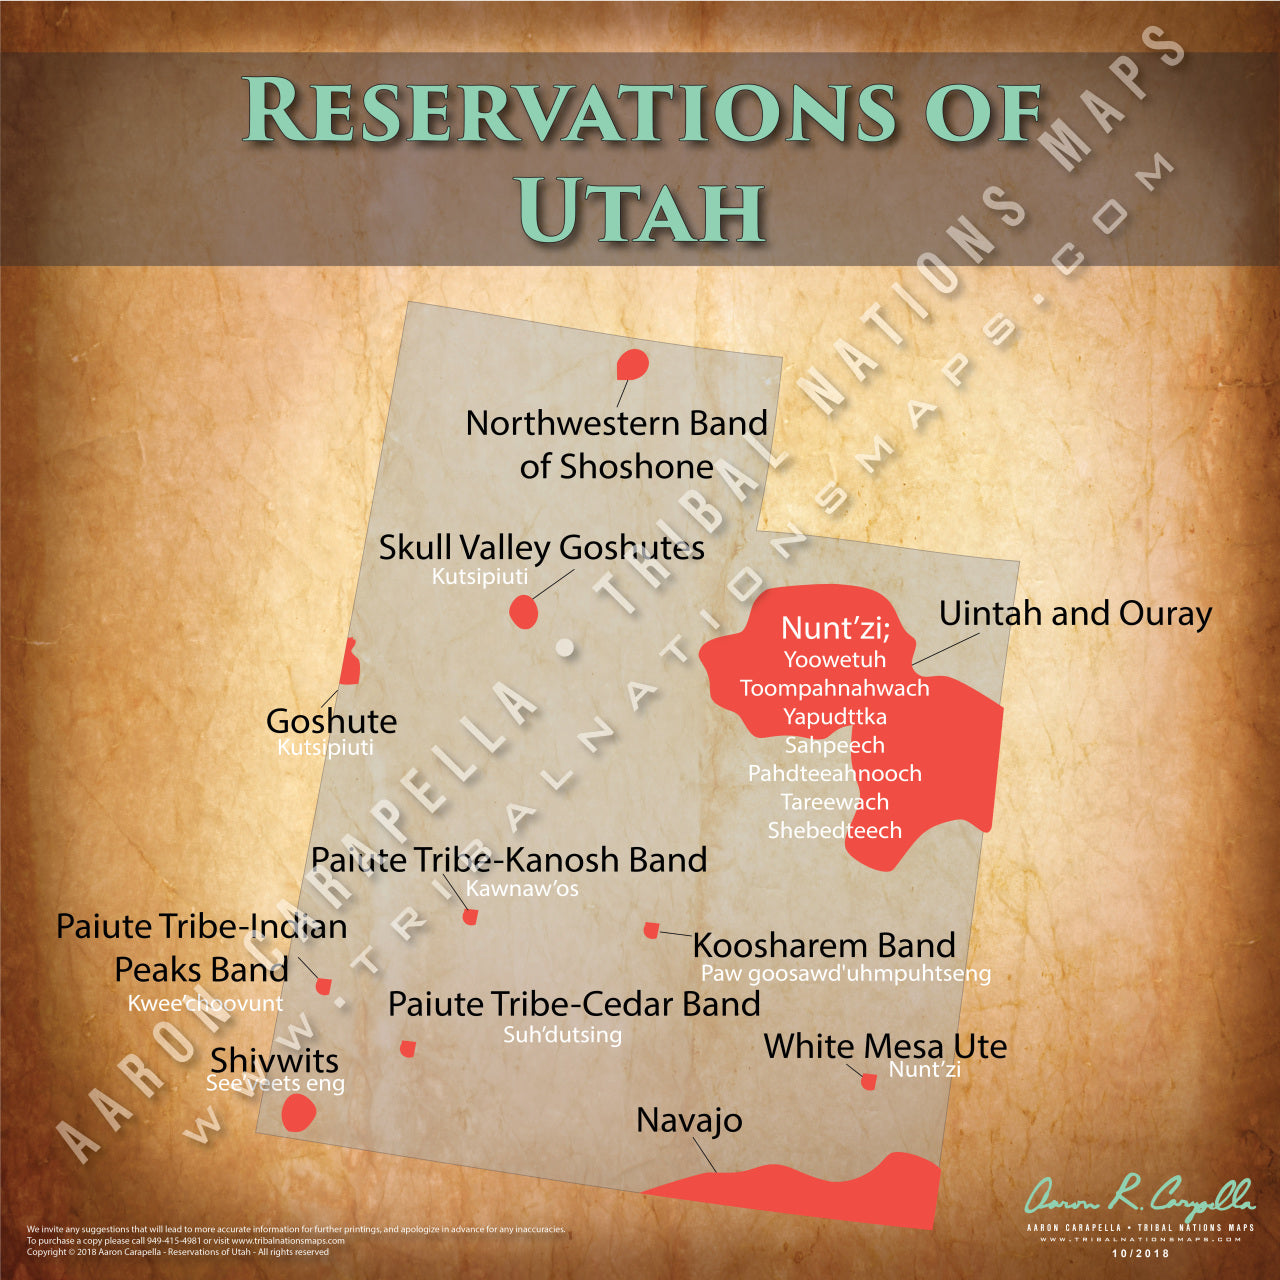 Utah Indian Reservation Map Poster [Native American Map Poster / Wall Art]